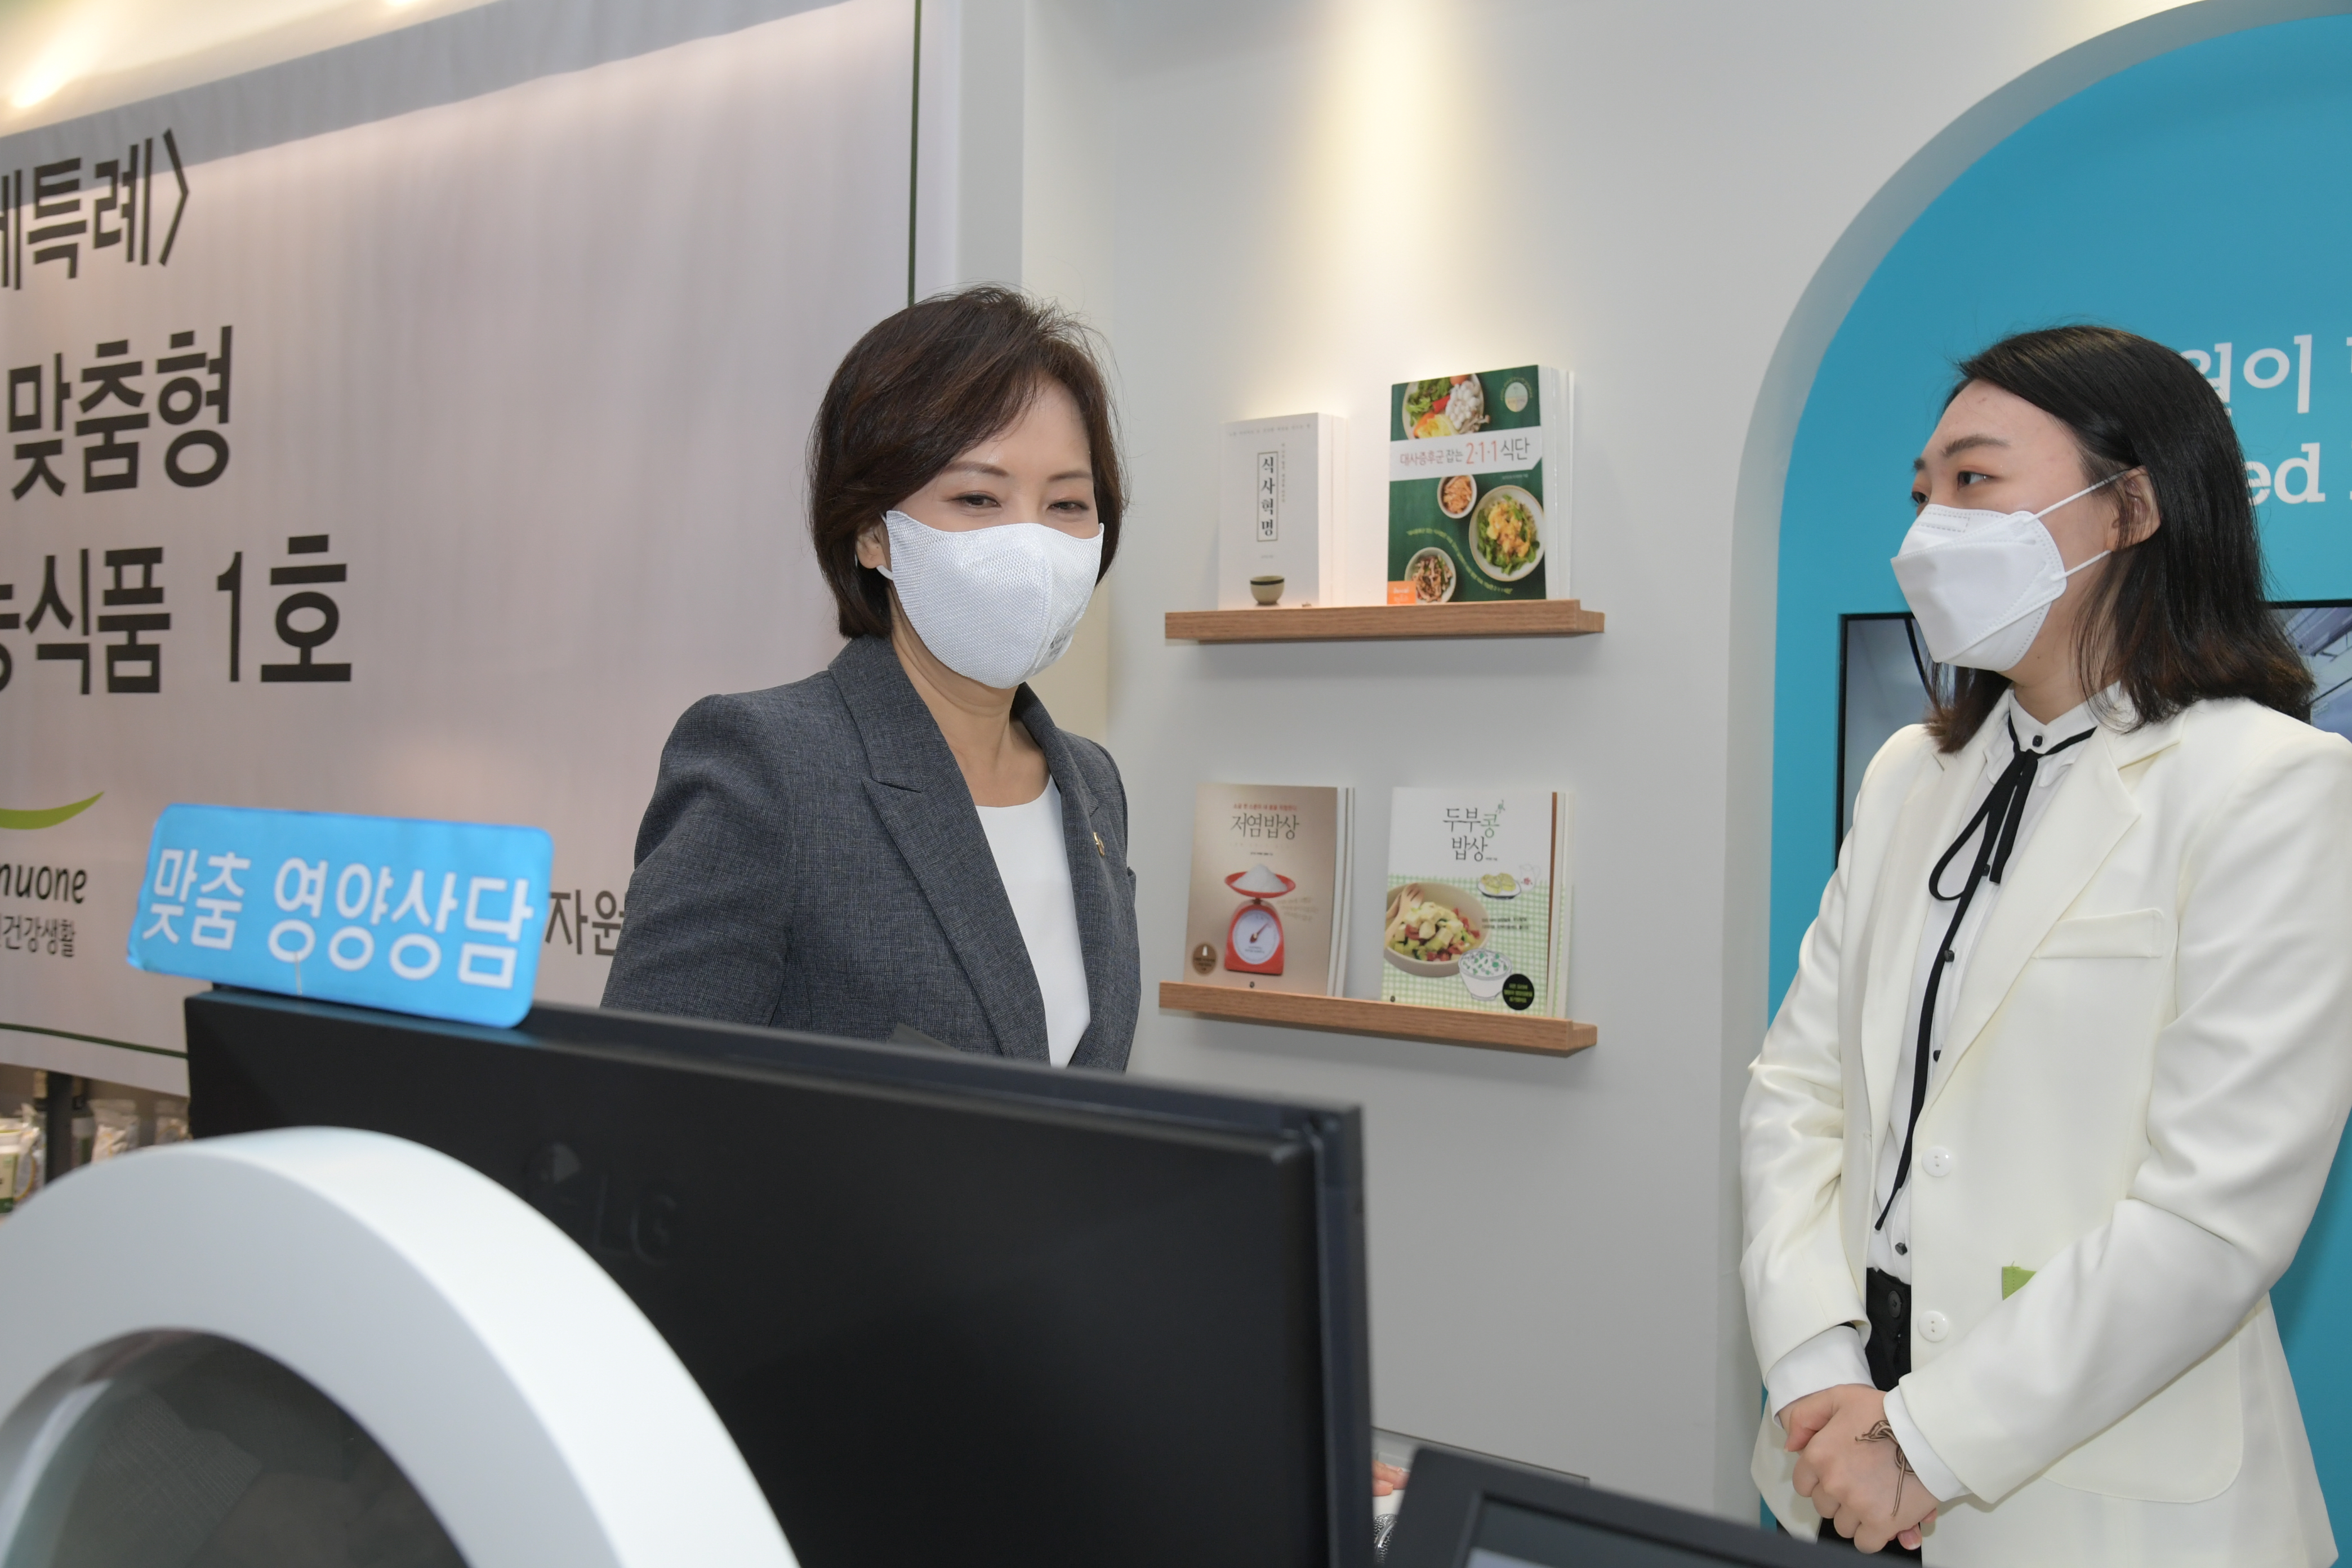 Photo News4 - [Jul. 10, 2020] Visit to the first customized health functional food store